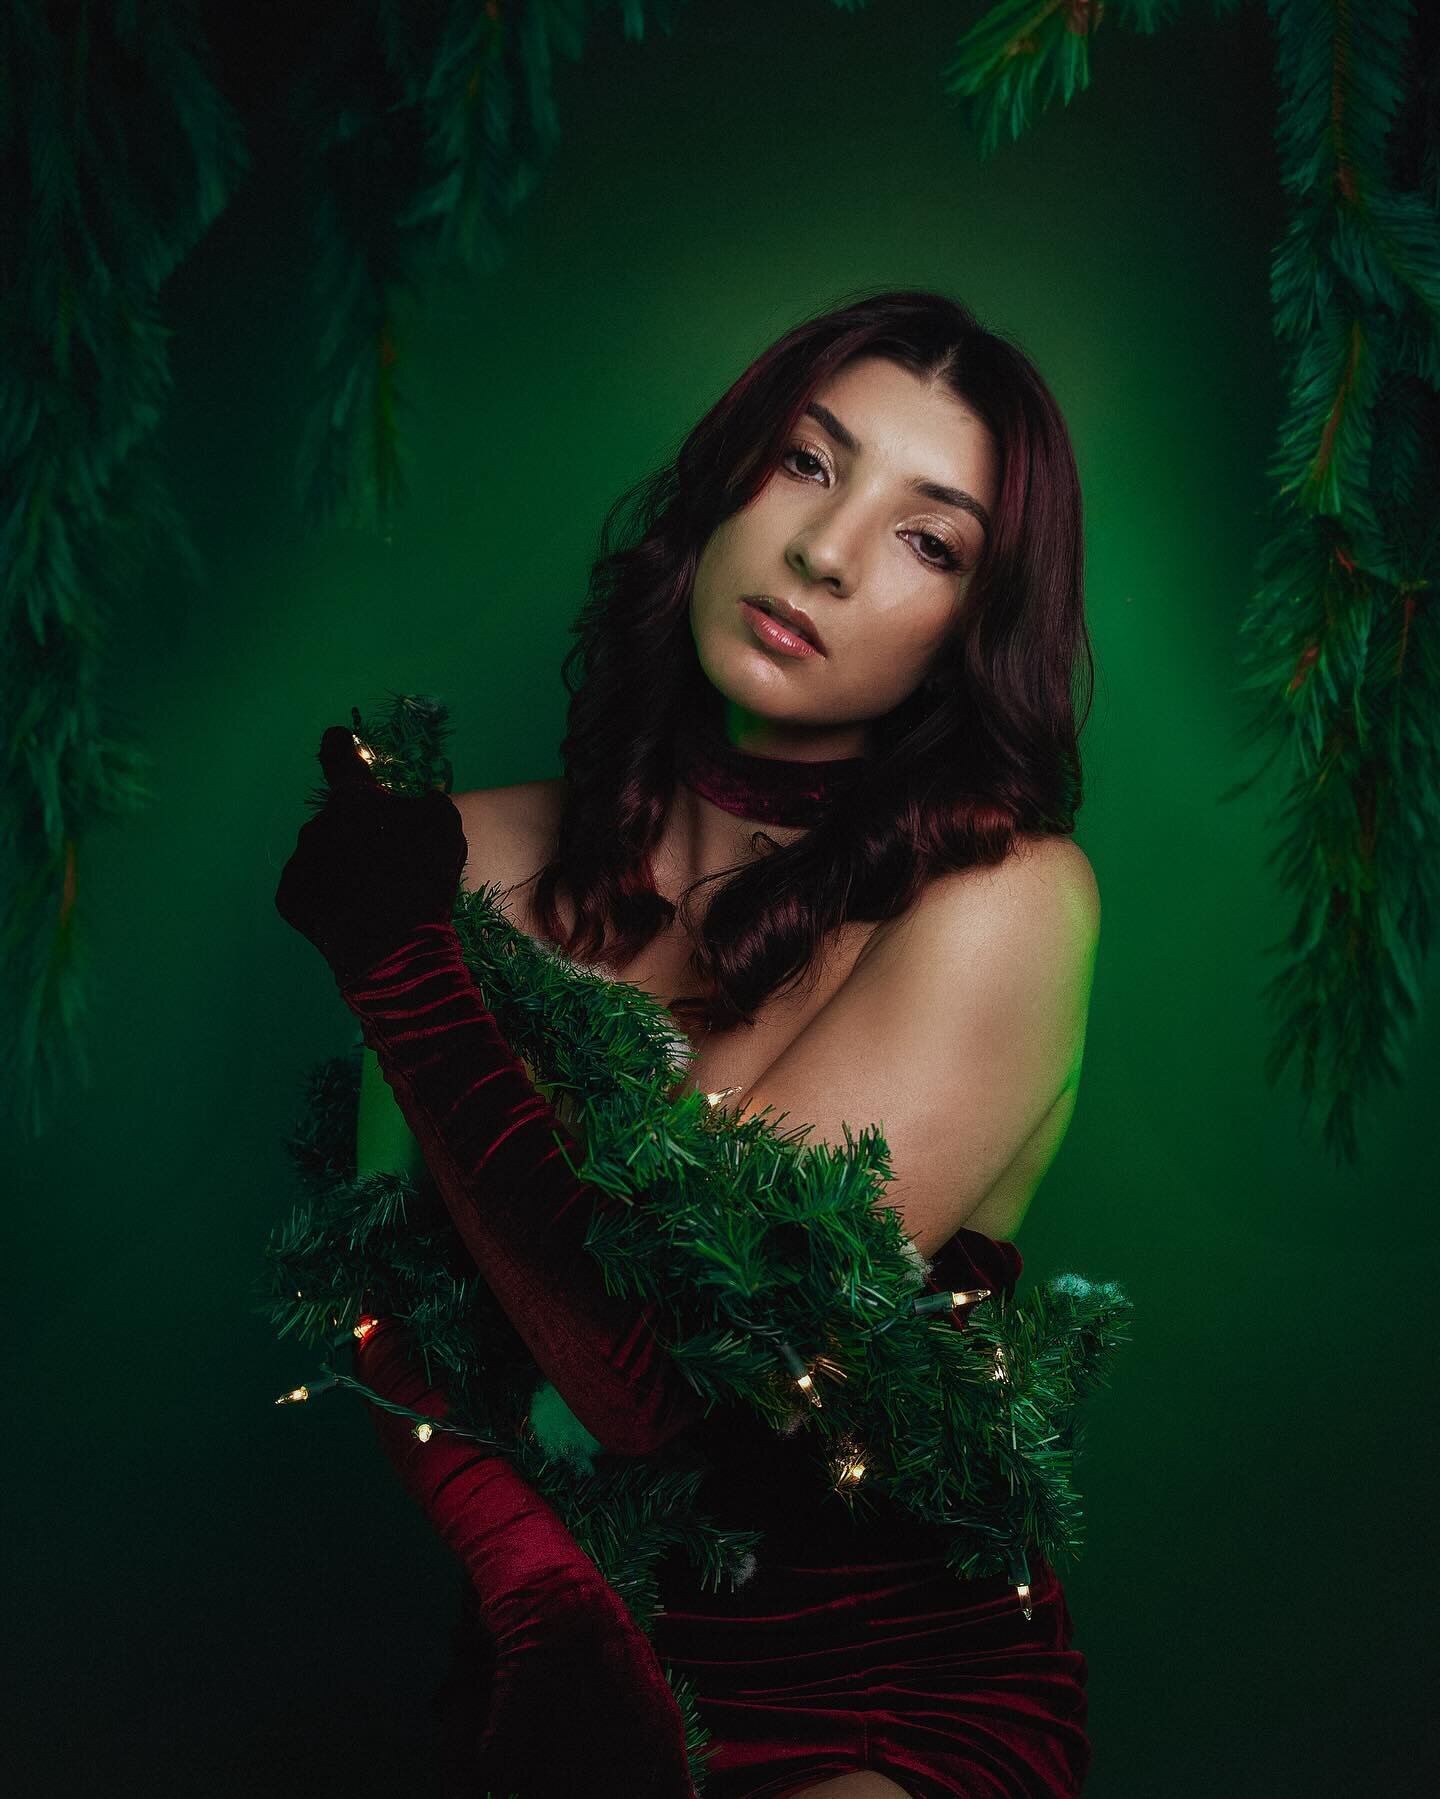 good things come in tall packages 🎄 wishing y&rsquo;all a happy Christmas and holiday season ❤️
model: @hallenoberryy 

.
.
.
.
.
.
.
#christmasphotoshoot #instagramreels #holidayphotoshoot #bravoportraits #igreels #tangledinfilm #portraitsnyc #mood